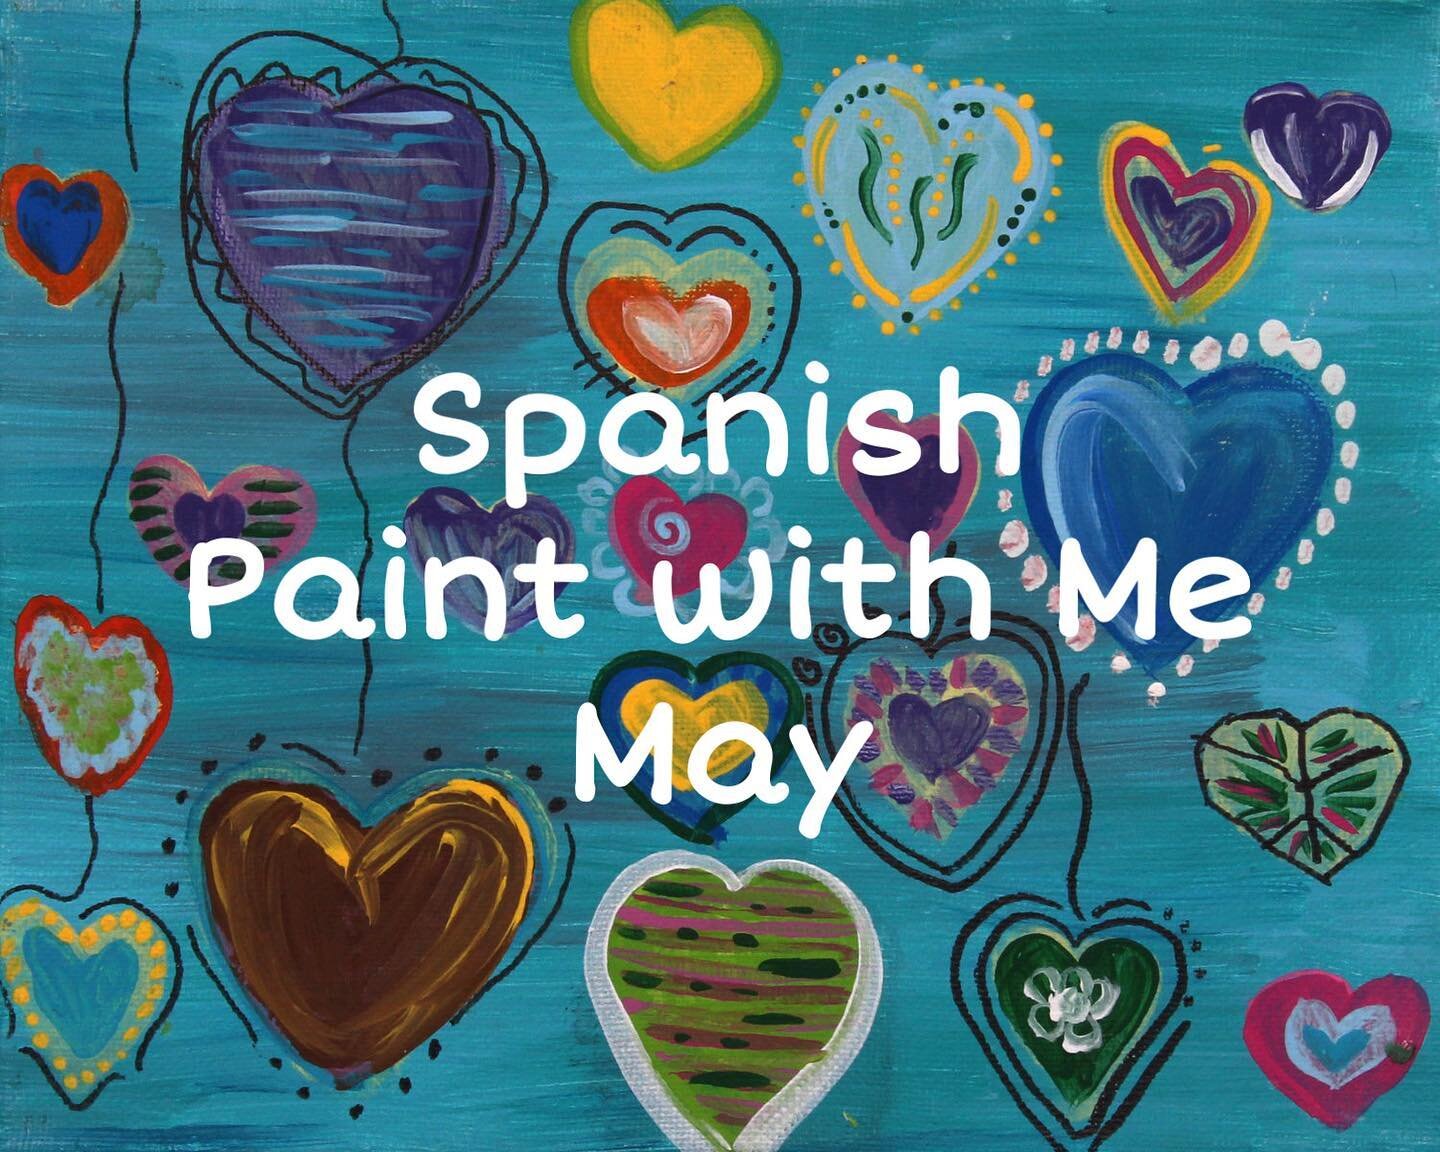 Spanish Paint with Me May 💙

Sunday&rsquo;s 6:00-7:00 pm
$7.00

Paint with me classes now in Spanish! A virtual class via Zoom that is flexible! You can take the class and use your own supplies or purchase an affordable art kit from us. Reserve the 